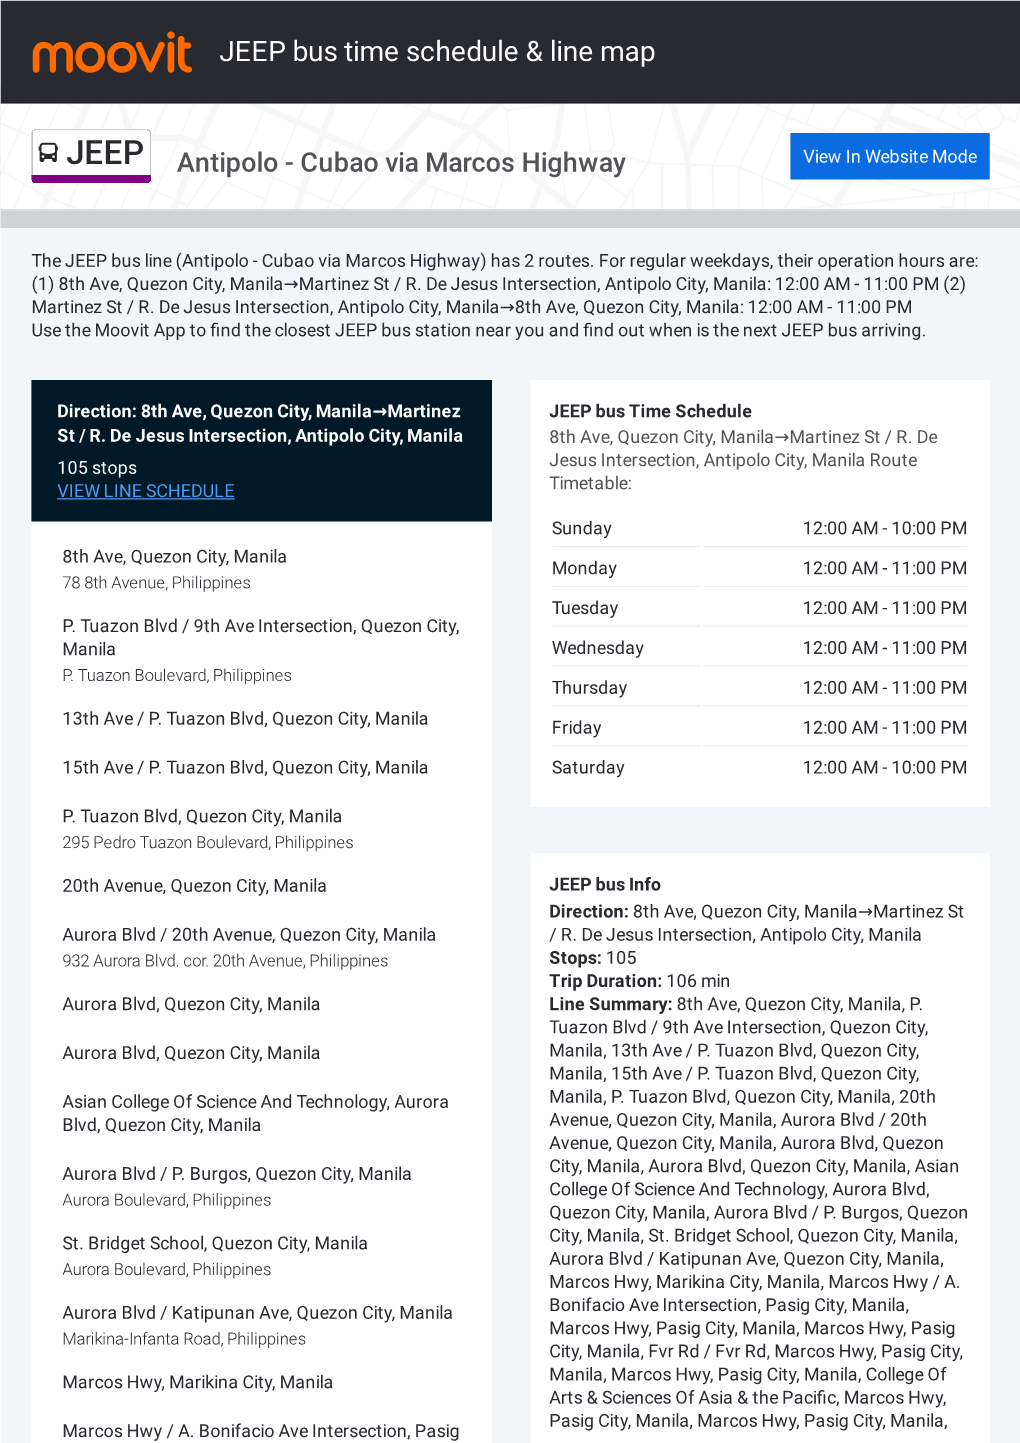 JEEP Bus Time Schedule & Line Route